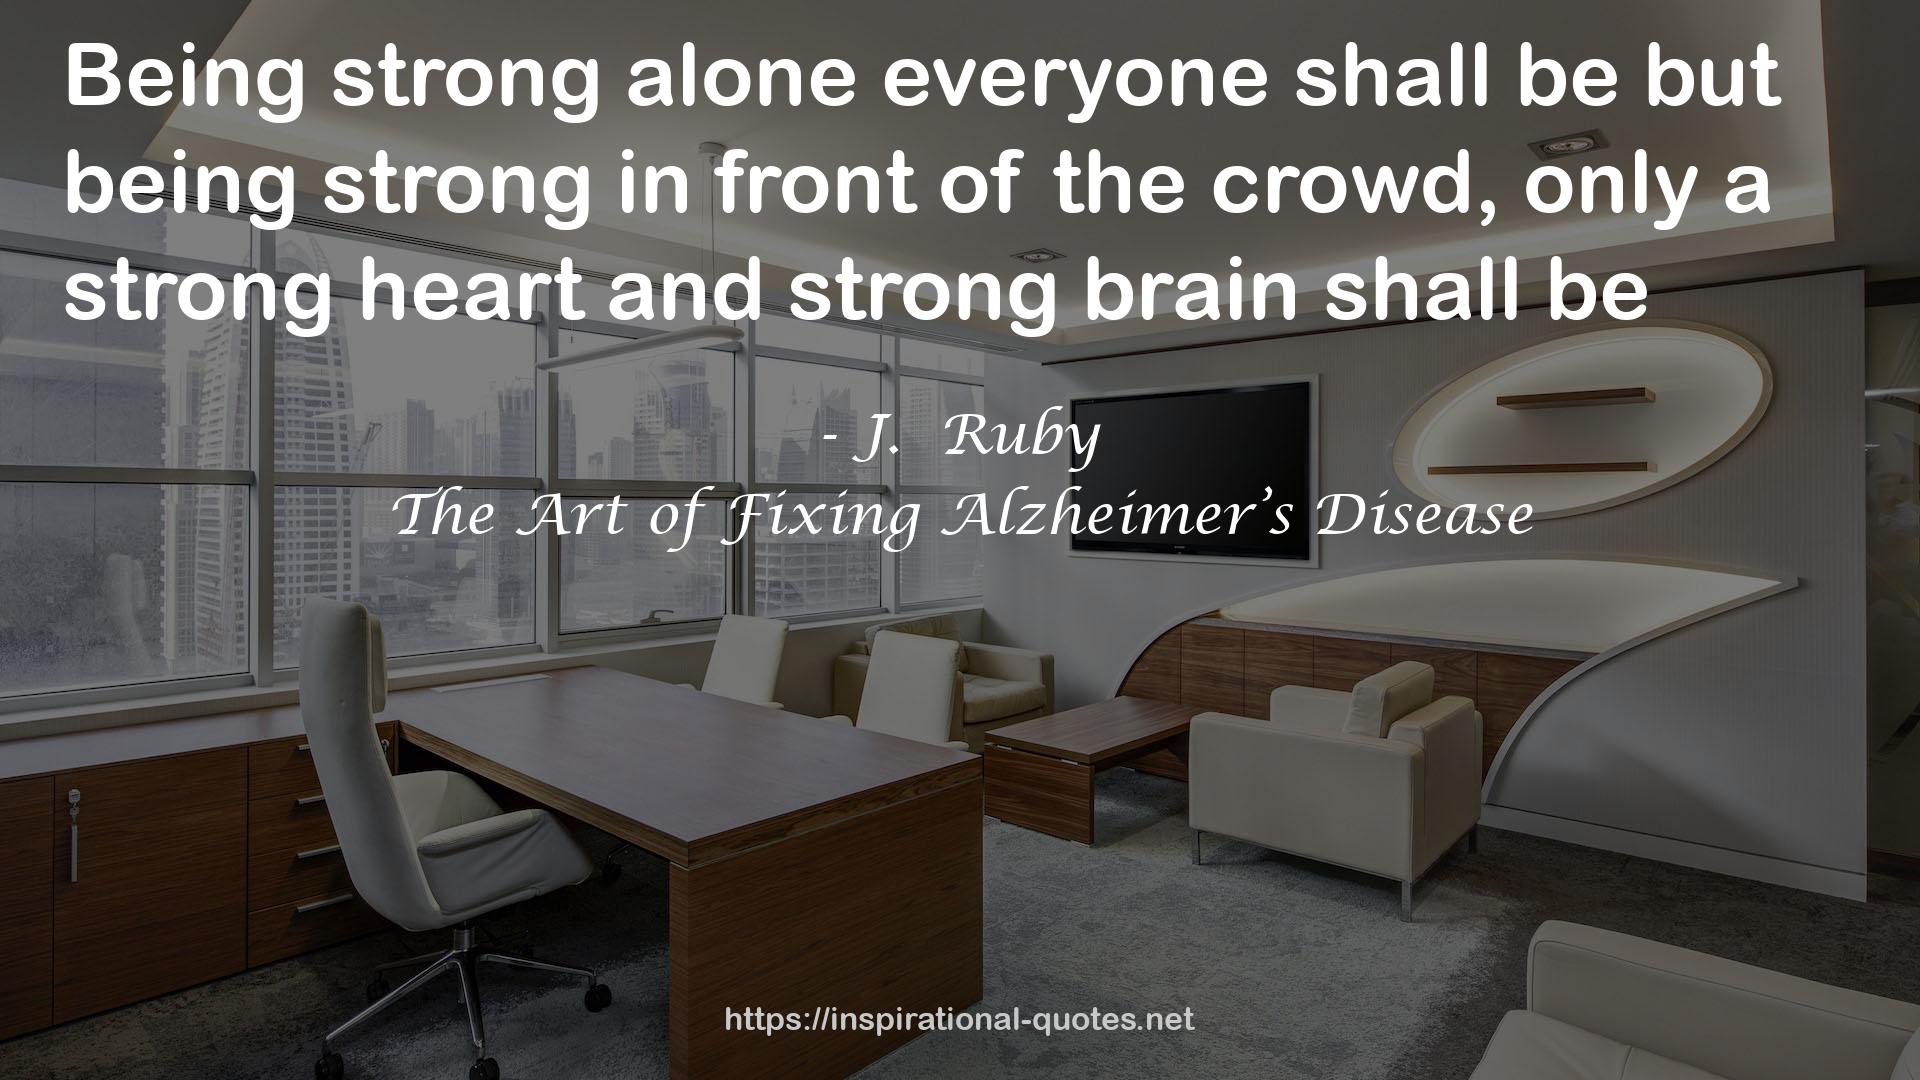 The Art of Fixing Alzheimer’s Disease QUOTES